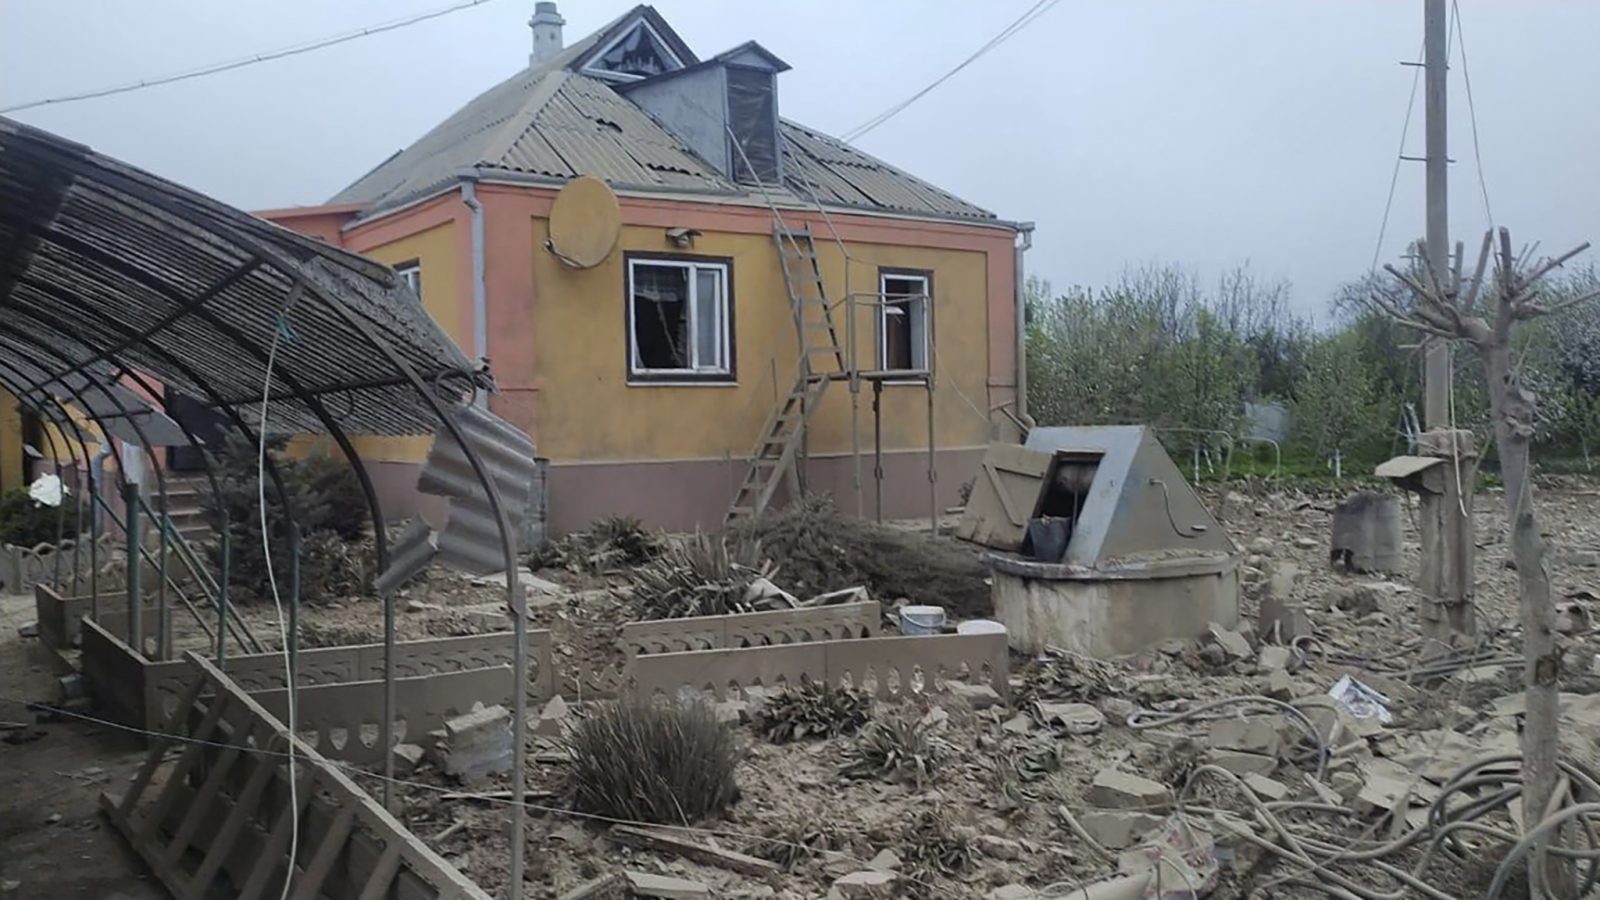 epa10602254 A handout photo made available by the Head of the Dnipropetrovsk Regional Military Administration, Serhiy Lysak via telegram shows the site of a residential area hit by shelling in Pavlohrad, Ukraine, 01 May 2023, amid Russia's invasion. At least 34 persons were injured, including five children, after a military strike hit a residential area in Pavlohrad, Lysak wrote on telegram. Russian troops entered Ukrainian territory on 24 February 2022, starting a conflict that has provoked destruction and a humanitarian crisis. One year on, fighting continues in many parts of the country.  EPA/DNIPROPETROVSK REGIONAL MILITARY ADMINISTRATION / HANDOUT -- BEST QUALITY AVAILABLE -- MANDATORY CREDIT HANDOUT EDITORIAL USE ONLY/NO SALES